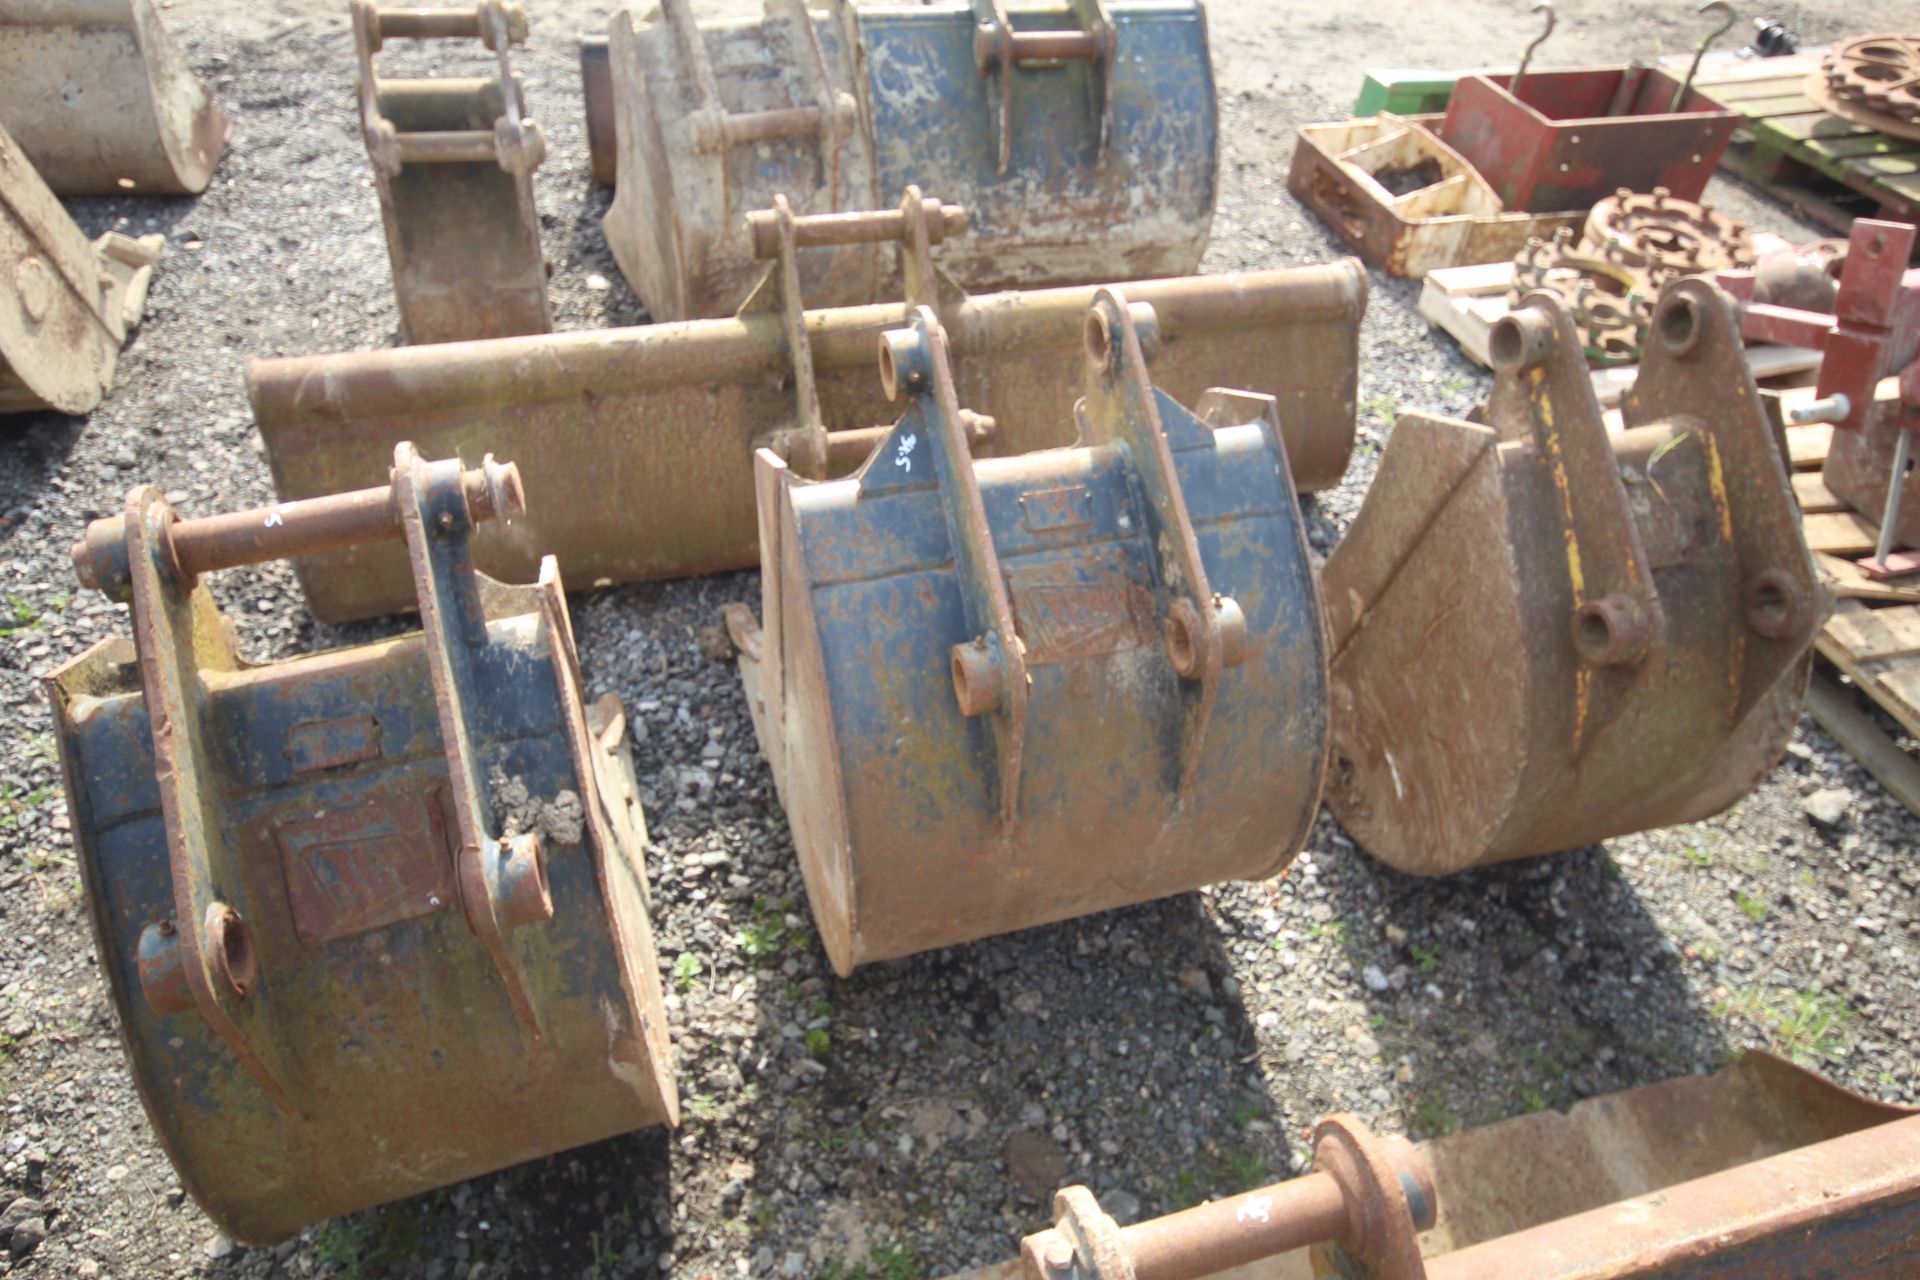 4x JCB excavator buckets. To include 17in, 23in, 17in and 6ft grading. For sale on behalf of the - Image 7 of 7